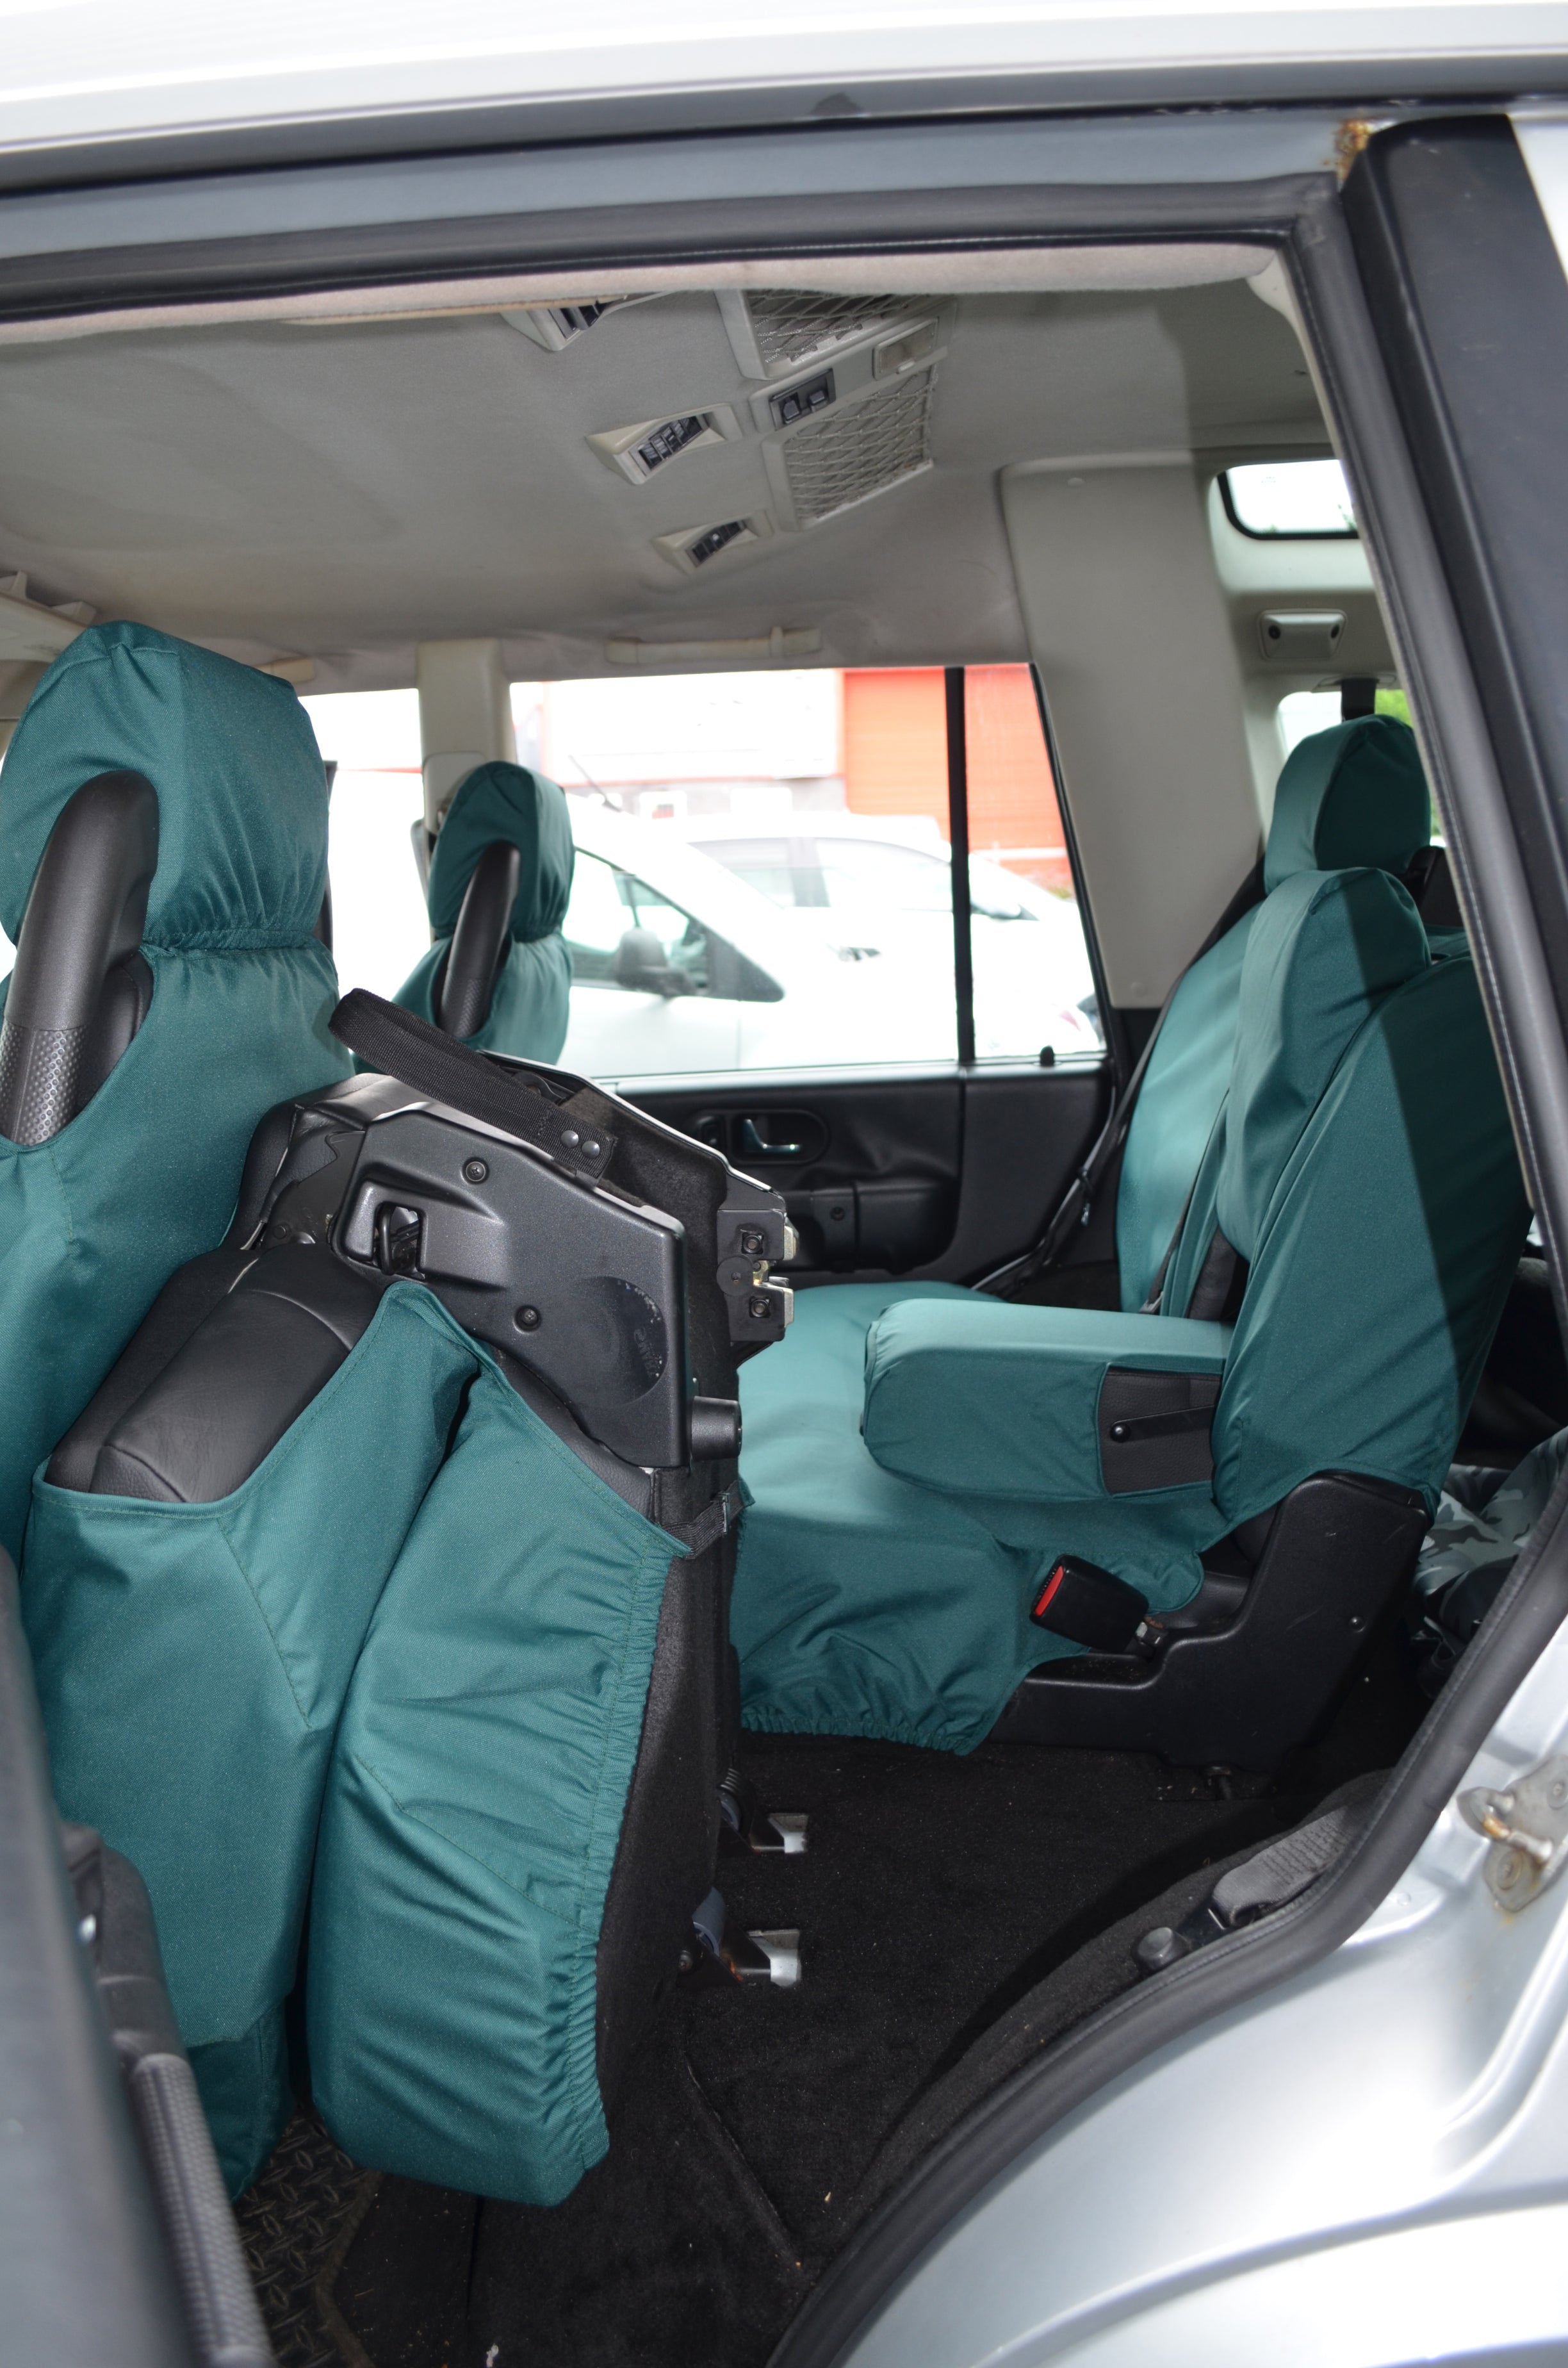 Land Rover Discovery 1998 - 2004 Series 2 Seat Covers  Turtle Covers Ltd